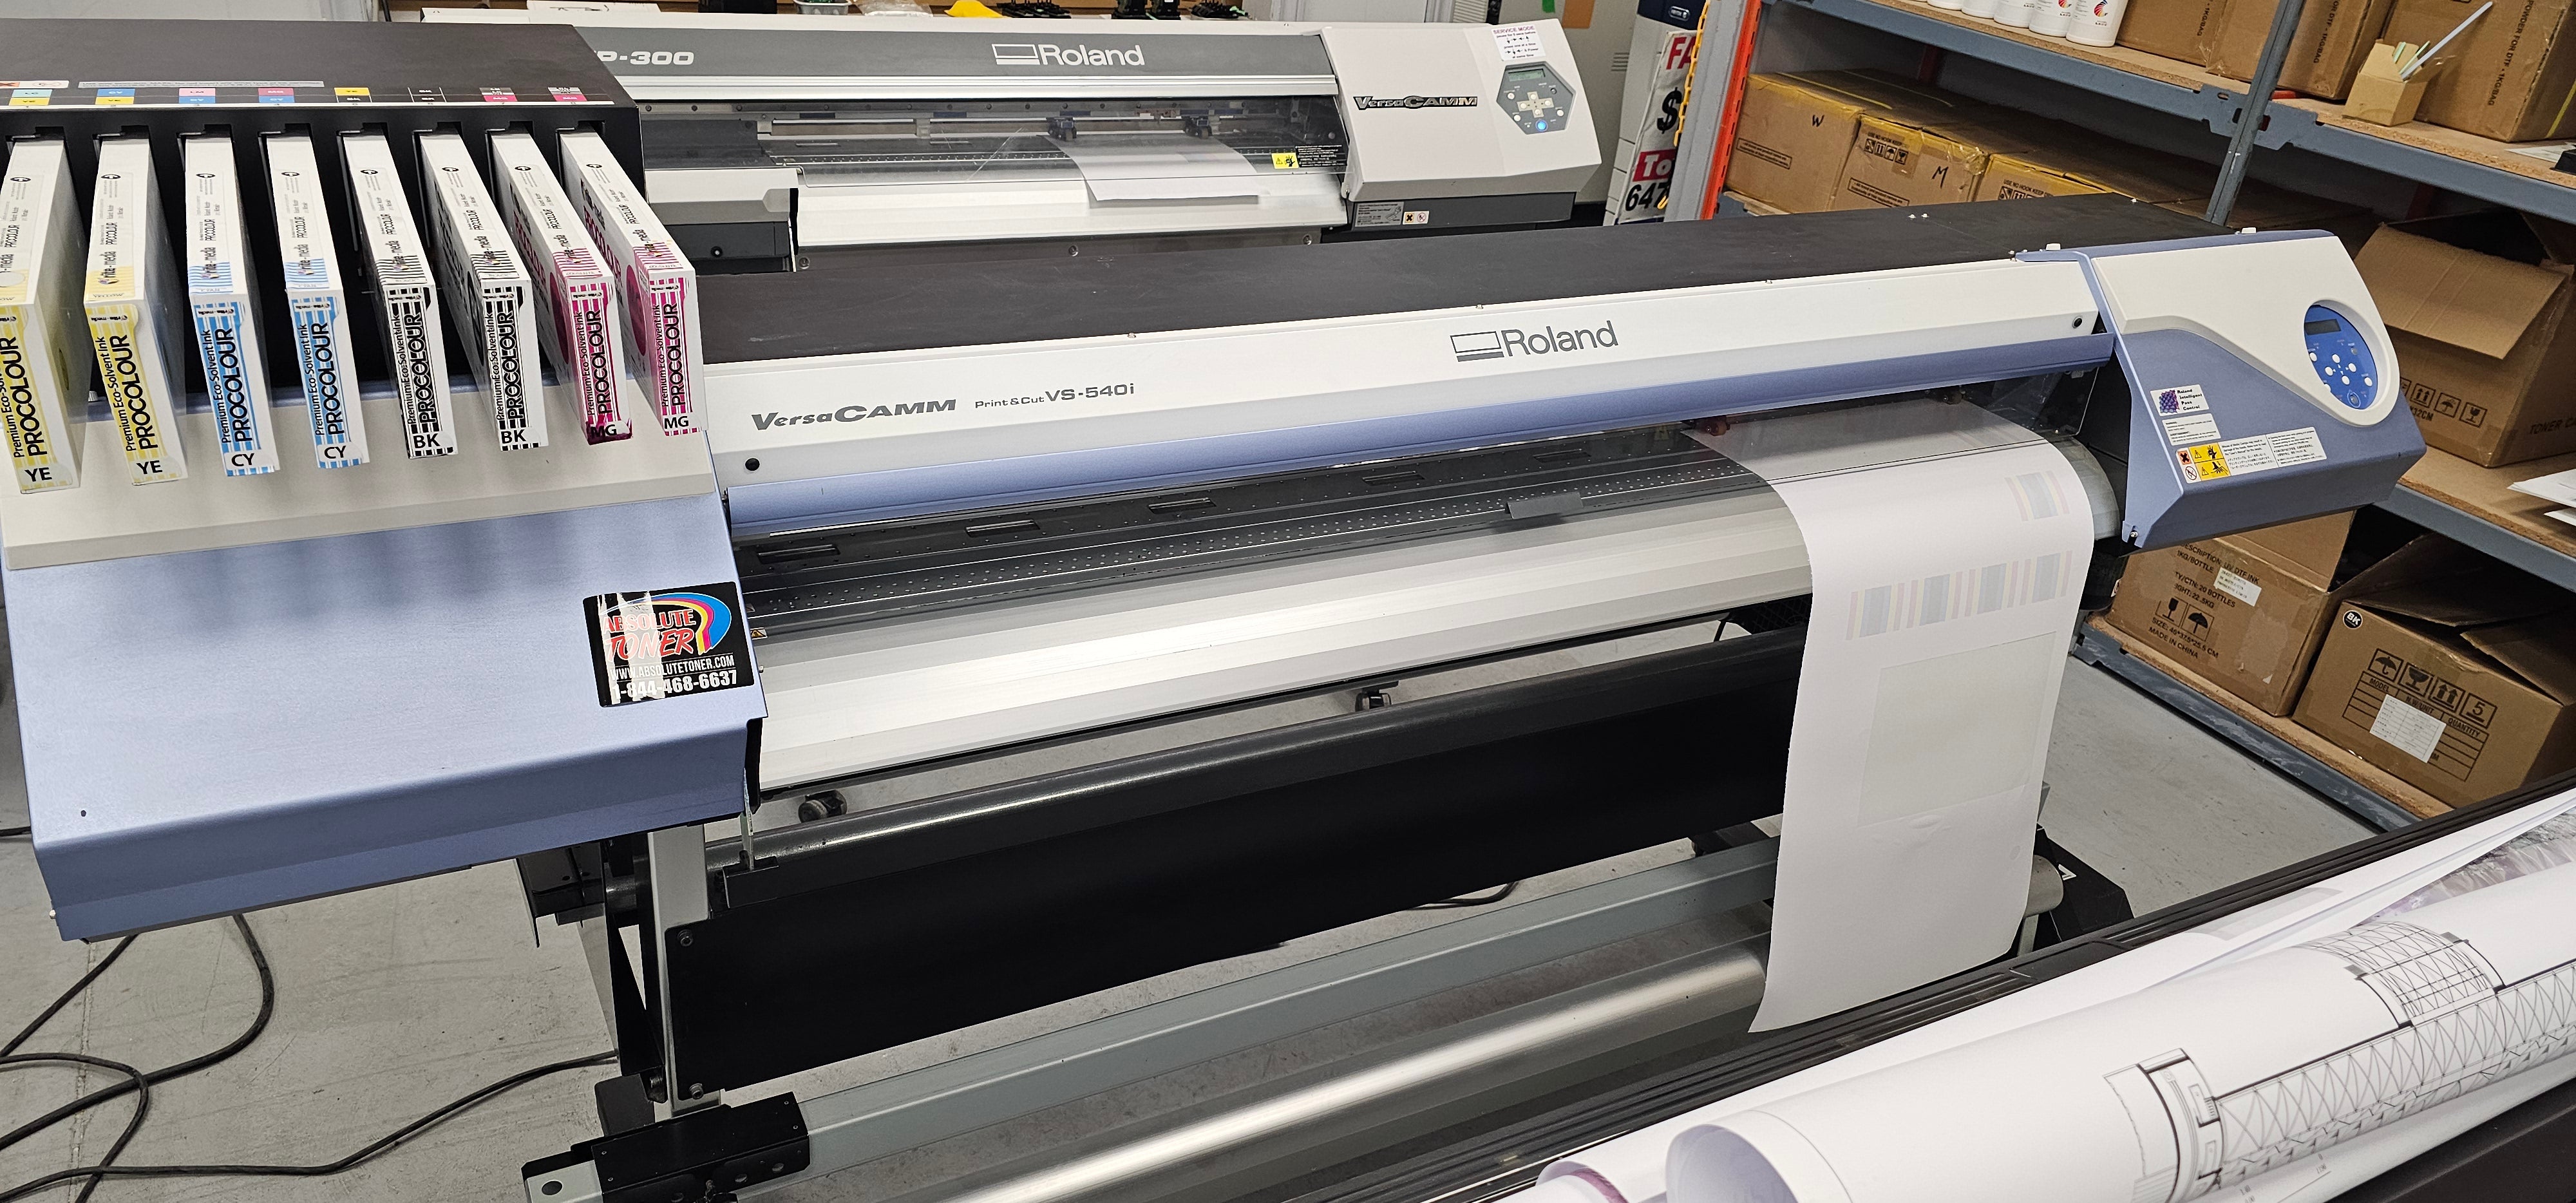 Absolute Toner Pre-owned Roland 54” VersaCAMM VS-540i PRINT & CUT upto 8 Channel High Rez Eco-Solvent Printer/Cutter Large Format Printers